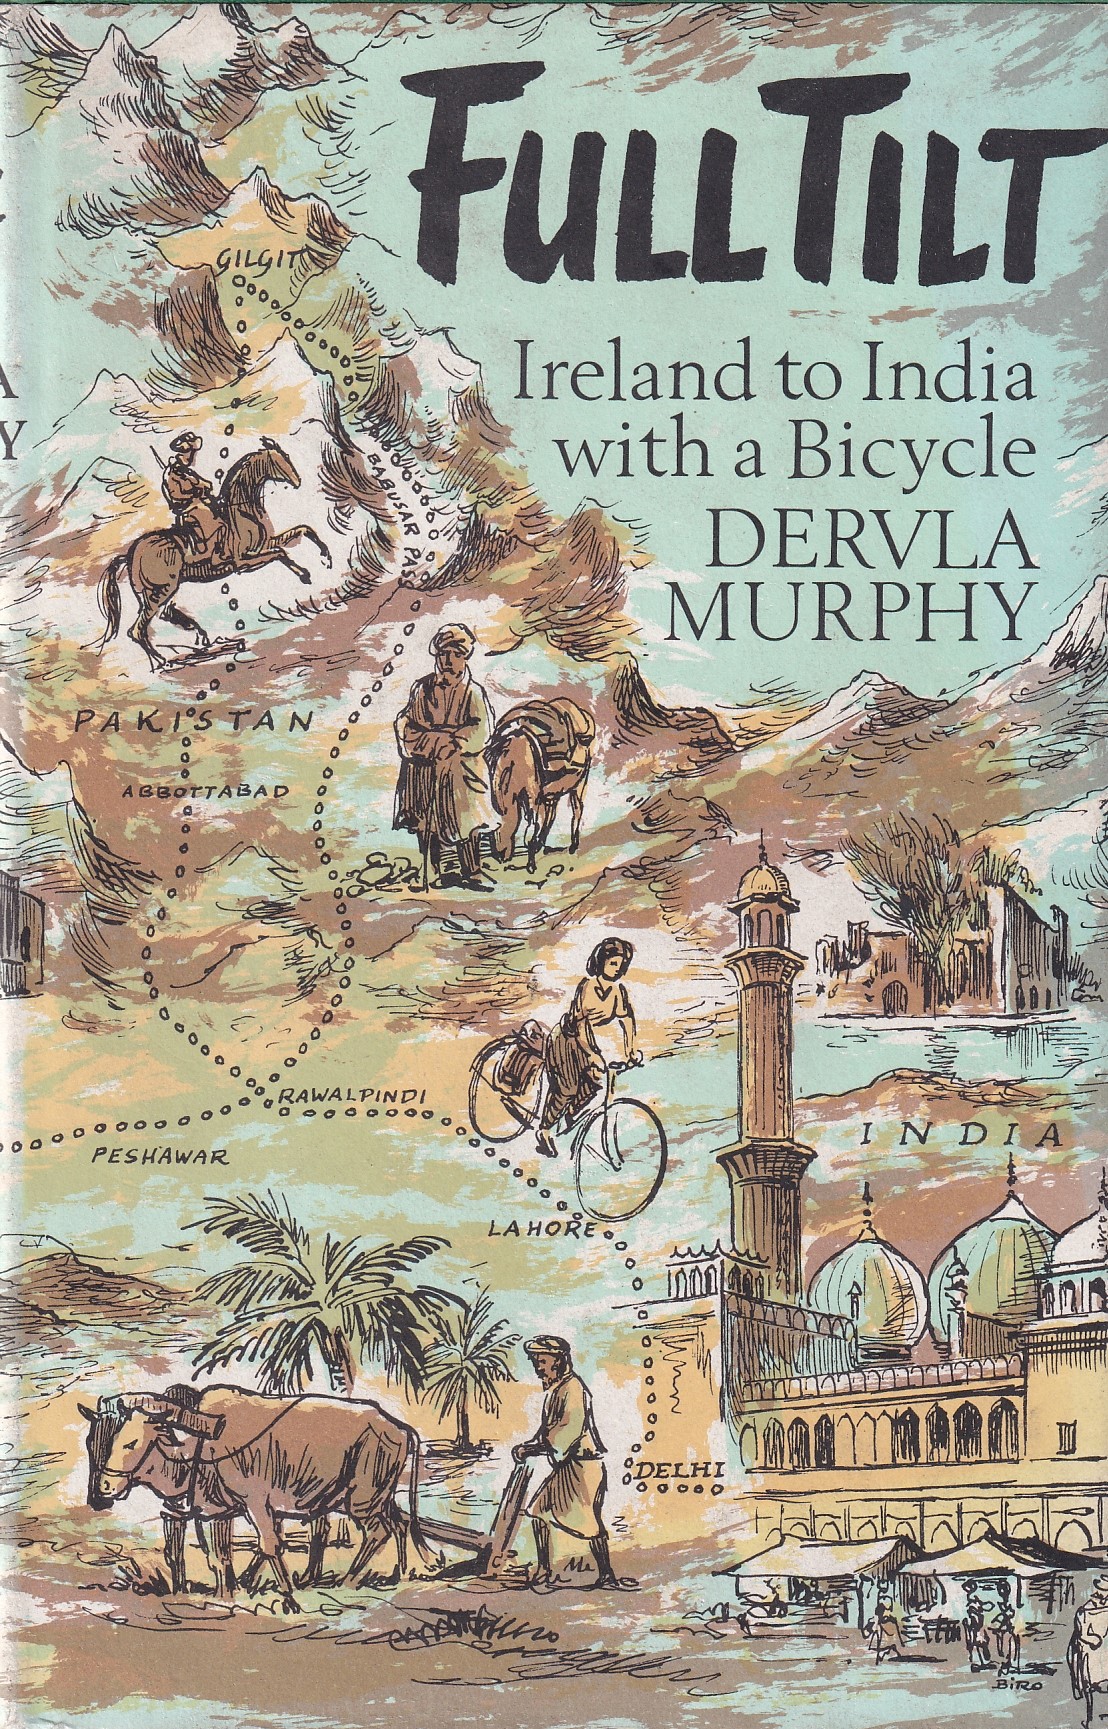 Full Tilt – Ireland to India with a Bicycle | Murphy, Dervla | Charlie Byrne's